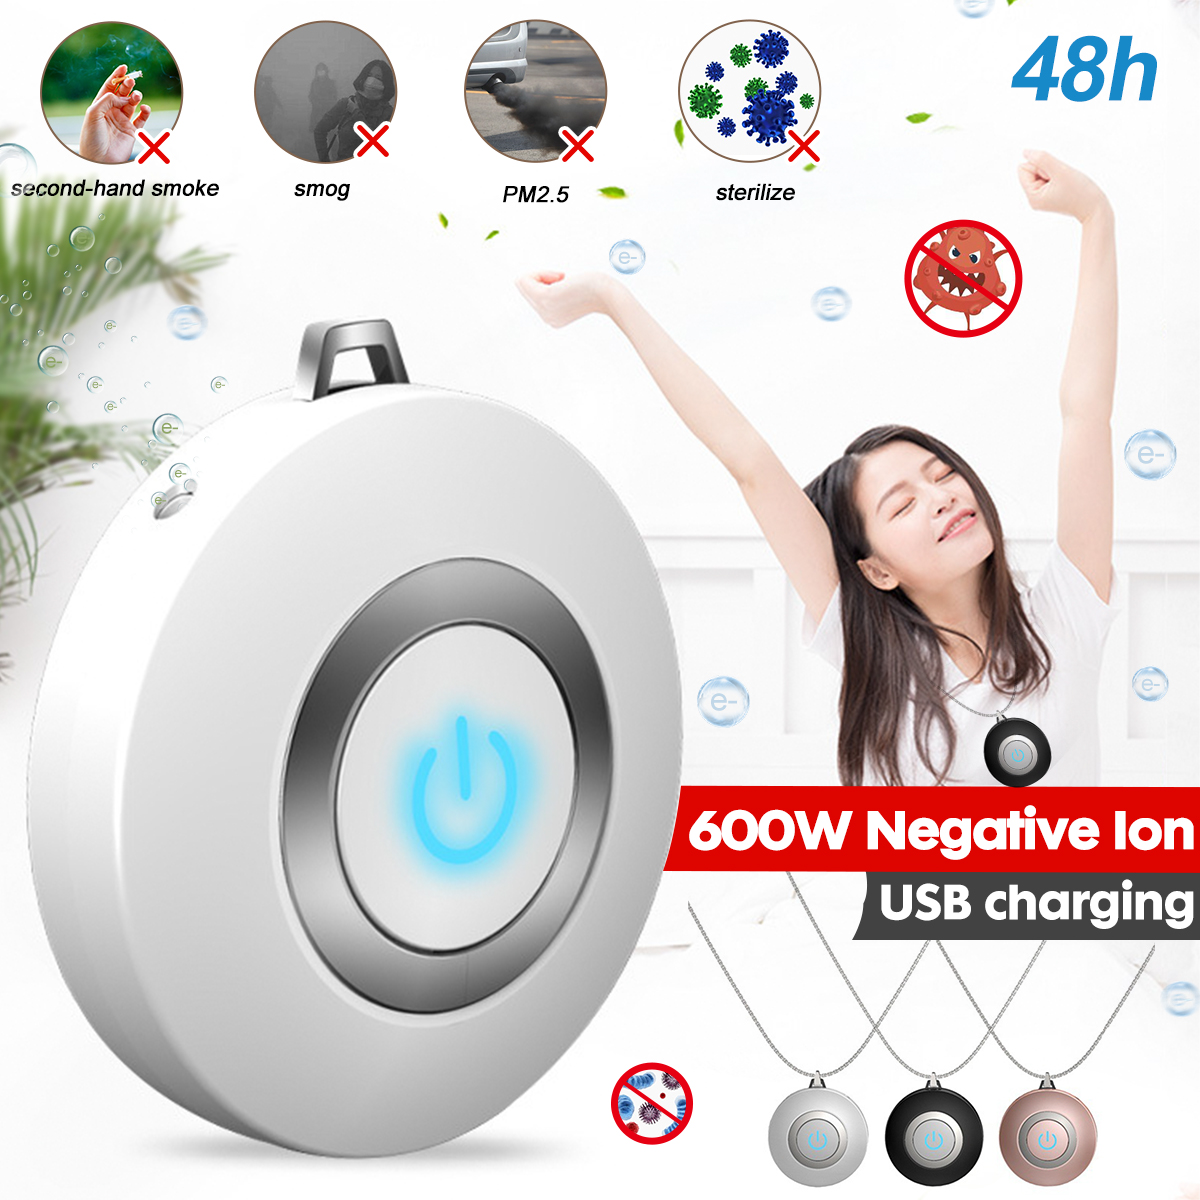 Wearable-Air-Purifier-Necklace-Mini-Portable-USB-Negative-Ion-Air-Cleaner-Freshener-1670191-1